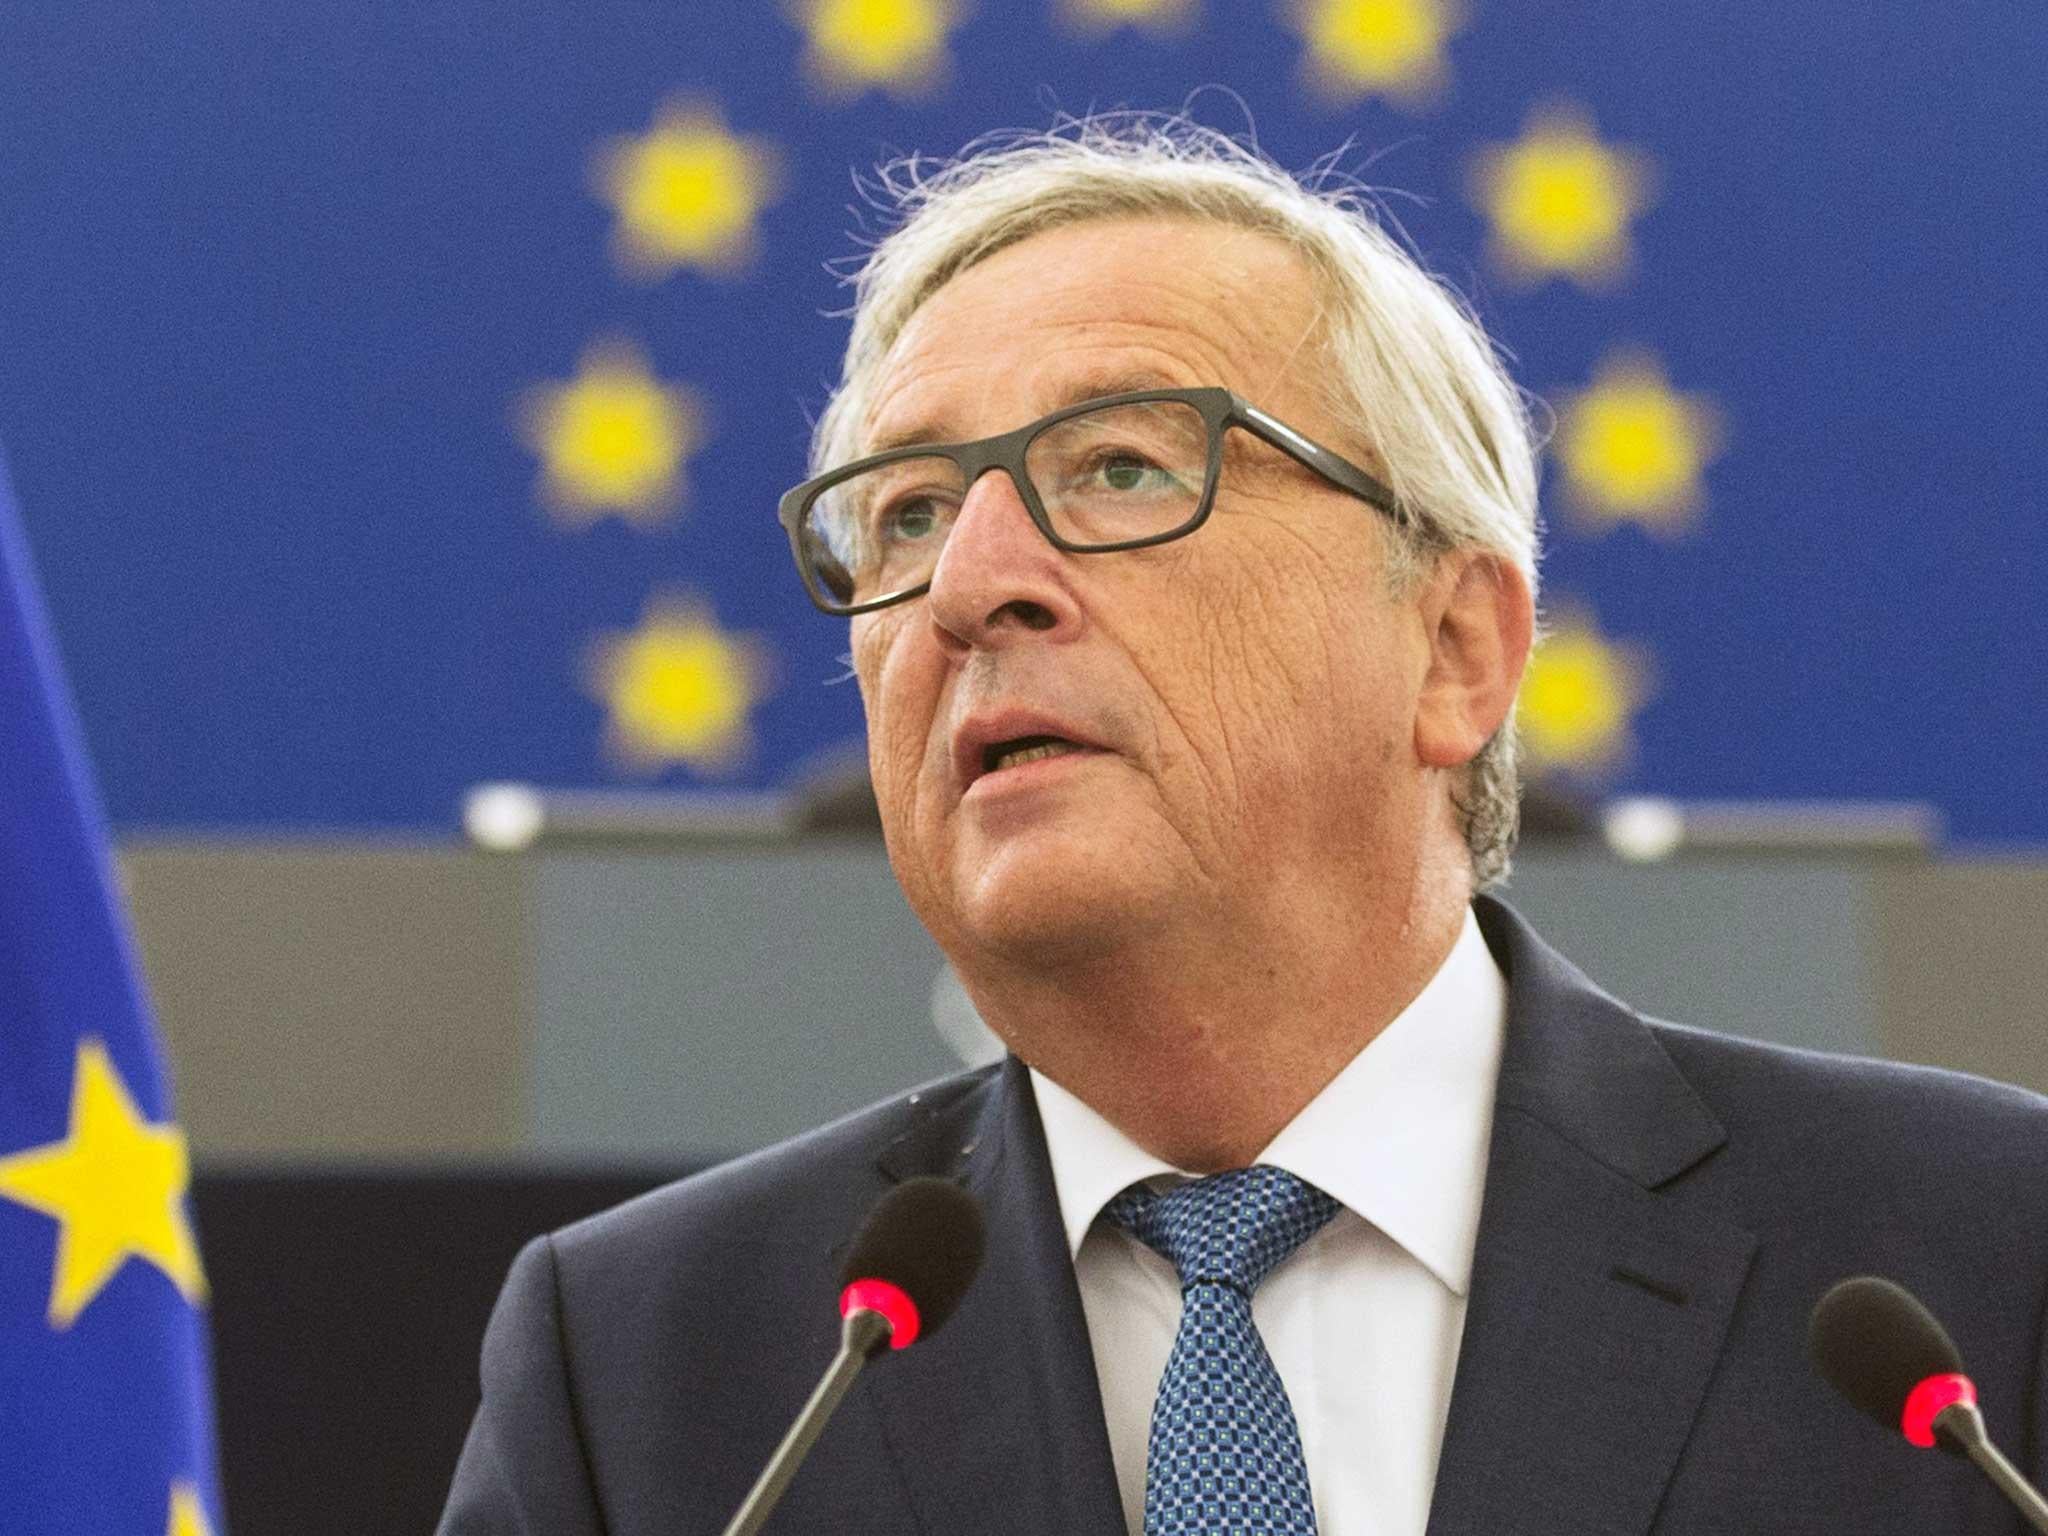 Jean-Claude Juncker, the President of the European Commission, says the EU is not proud enough of its achievements